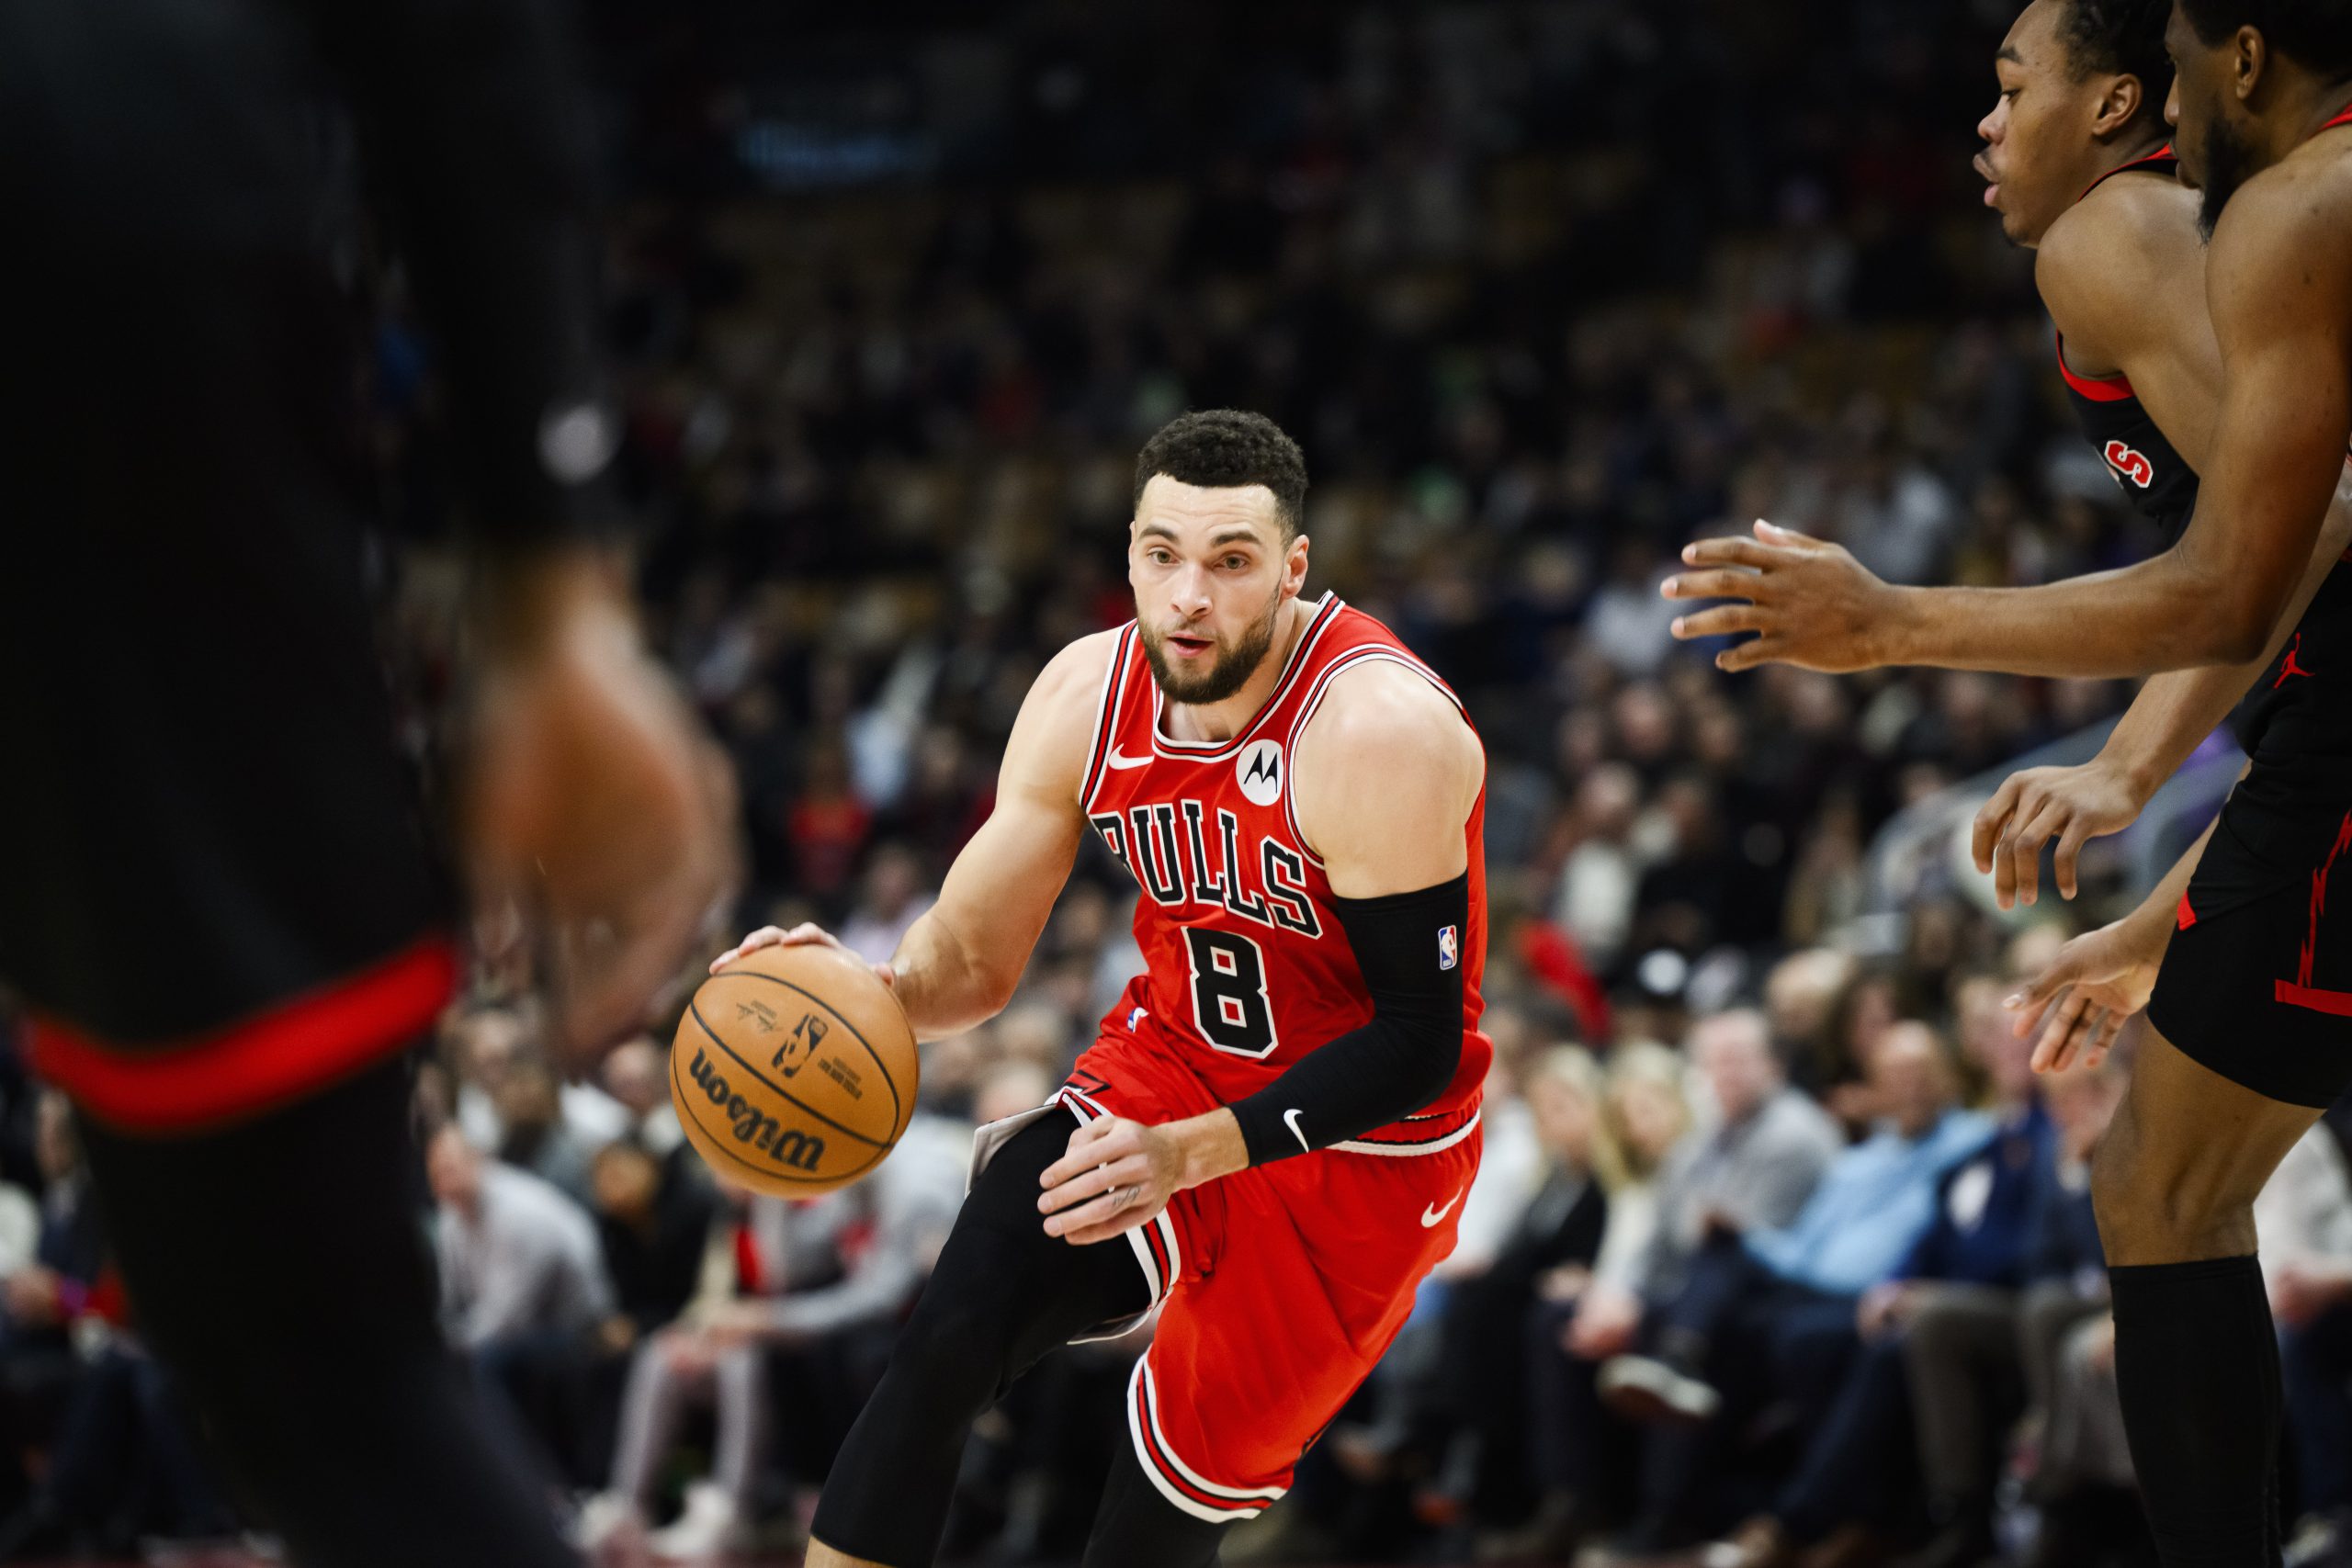 Zach LaVine of the Bulls to Miss Another Week Due to Ankle Injury, Confirms Coach Billy Donovan